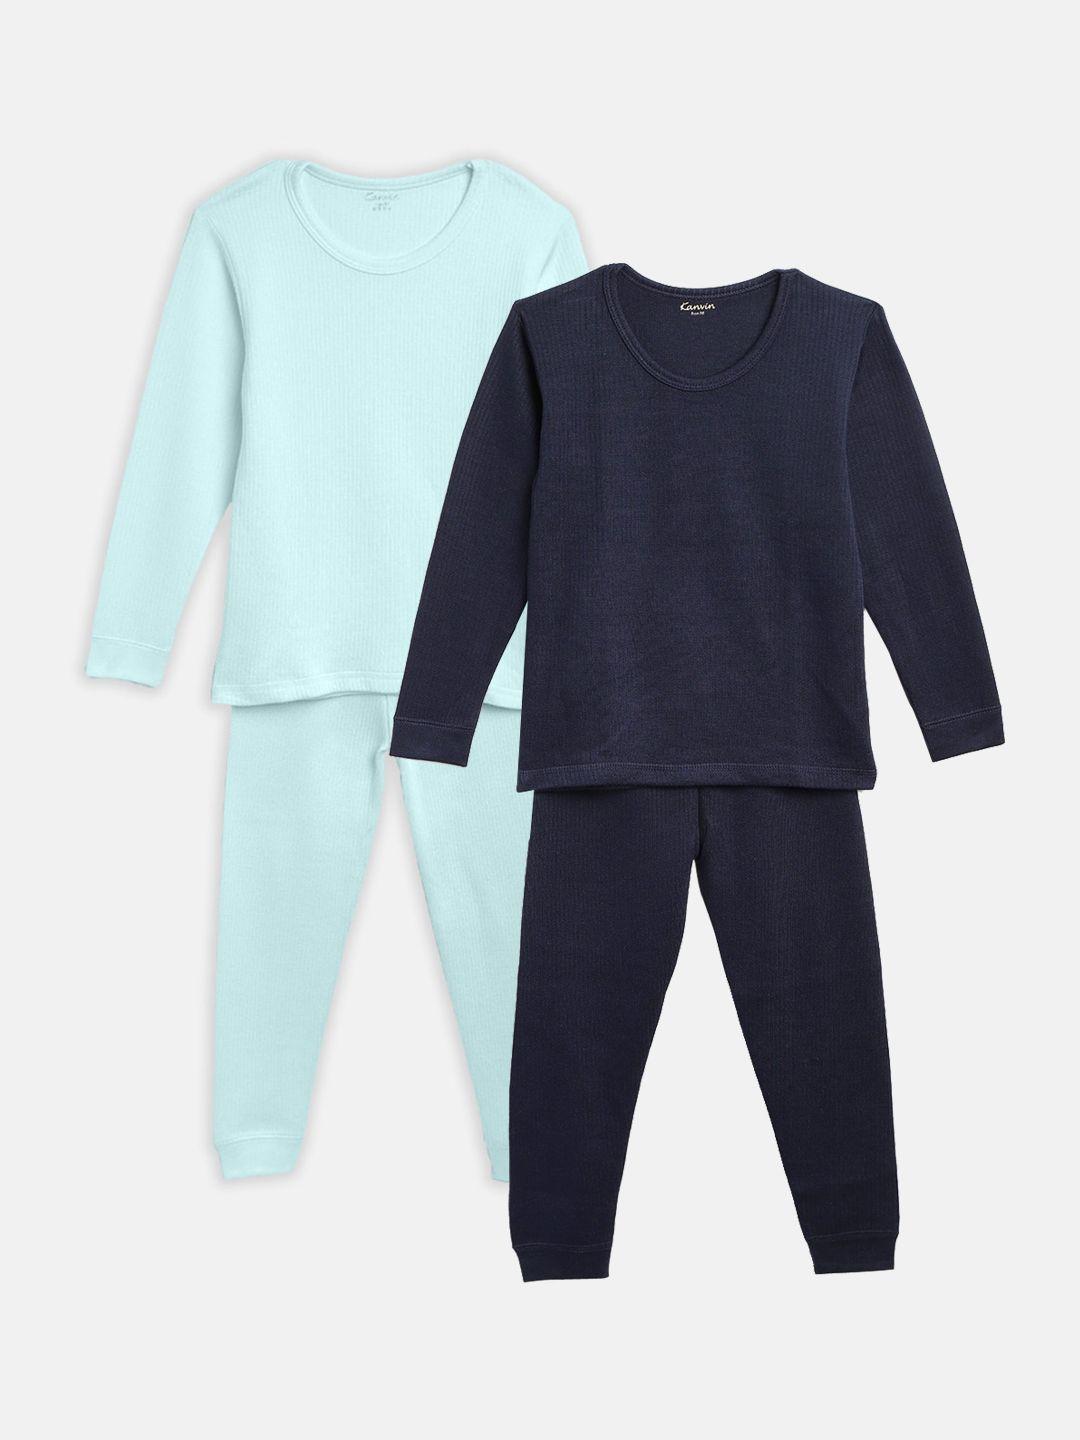 kanvin-boys-pack-of-2-turquoise-blue-&-navy-blue-solid-thermal-set